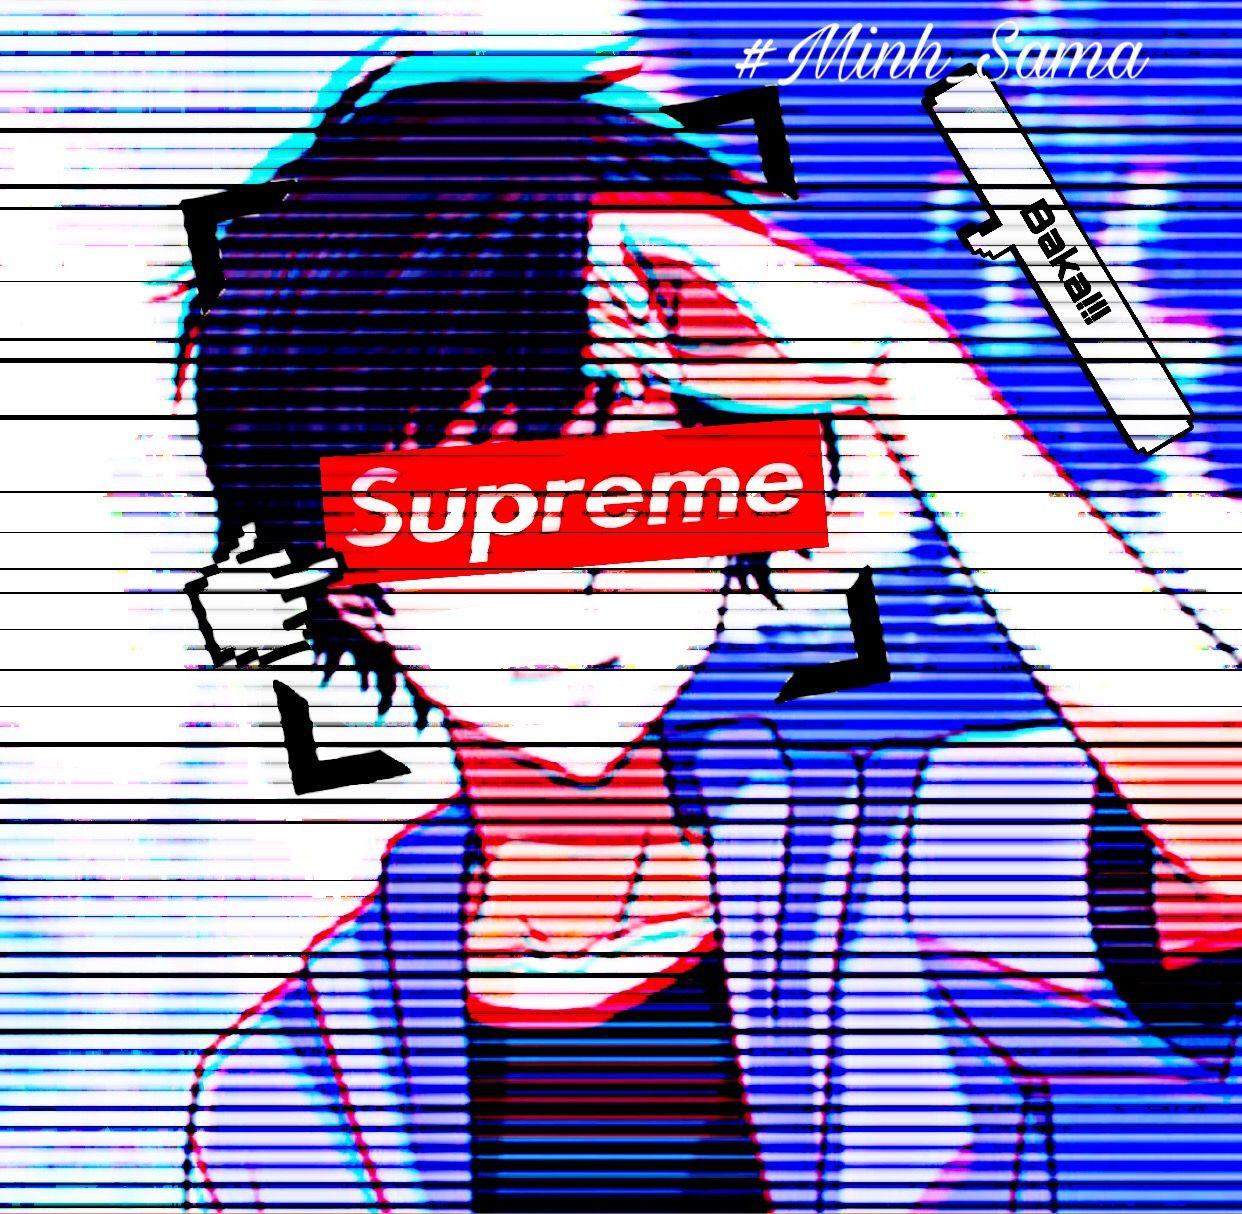 Anime Supreme Wallpapers - Top Free Anime Supreme Backgrounds -  WallpaperAccess